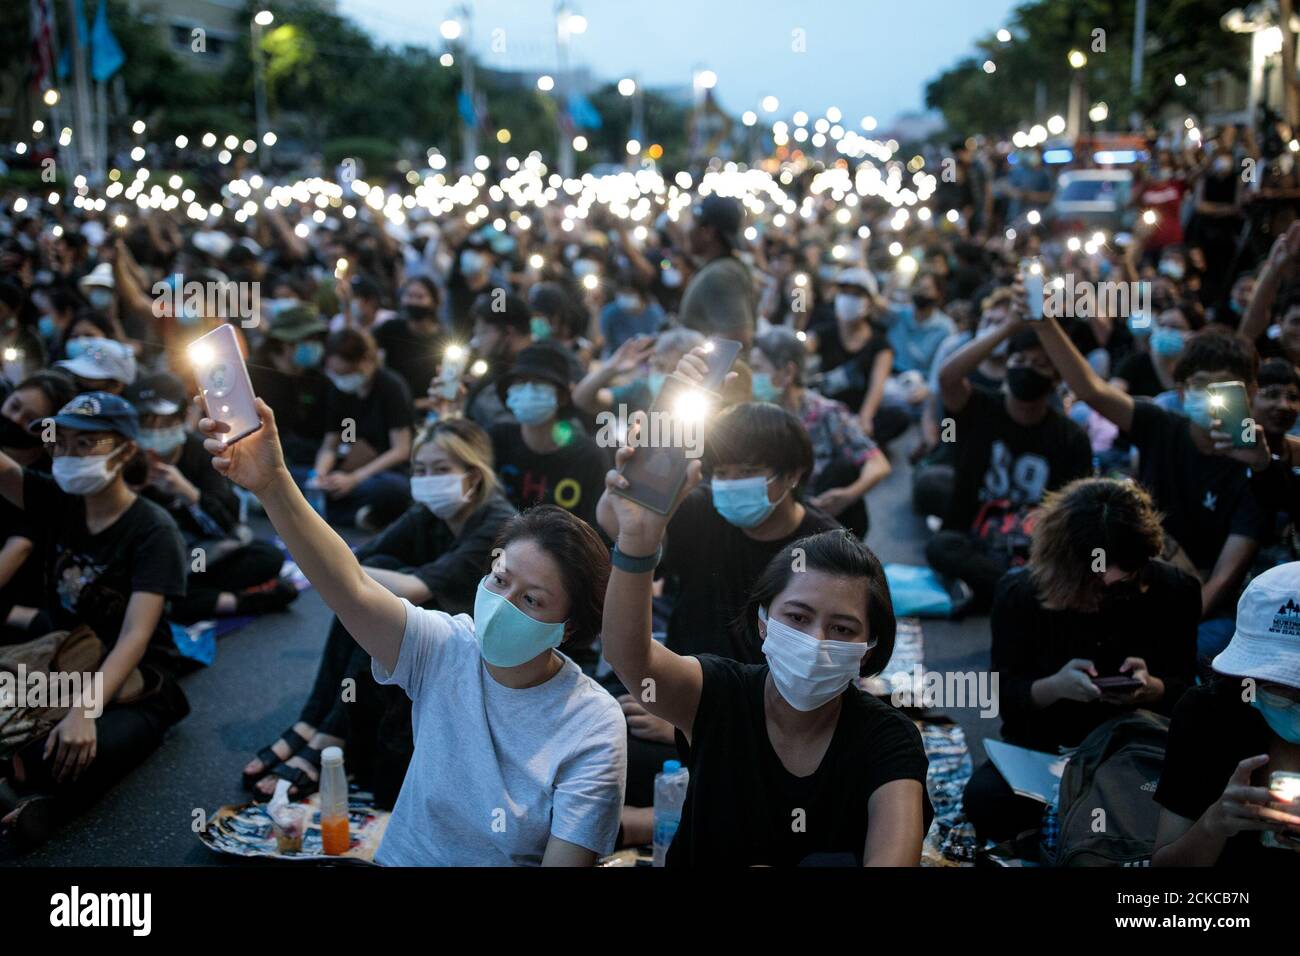 Thousands of protesters attend a demonstration against the government at Democracy Monument in Bangkok, Thailand on Sunday 16th, August 2020. Among the protesters' demands are calls for reform of Thailand's monarchy. (Photo - Jack Taylor) Stock Photo